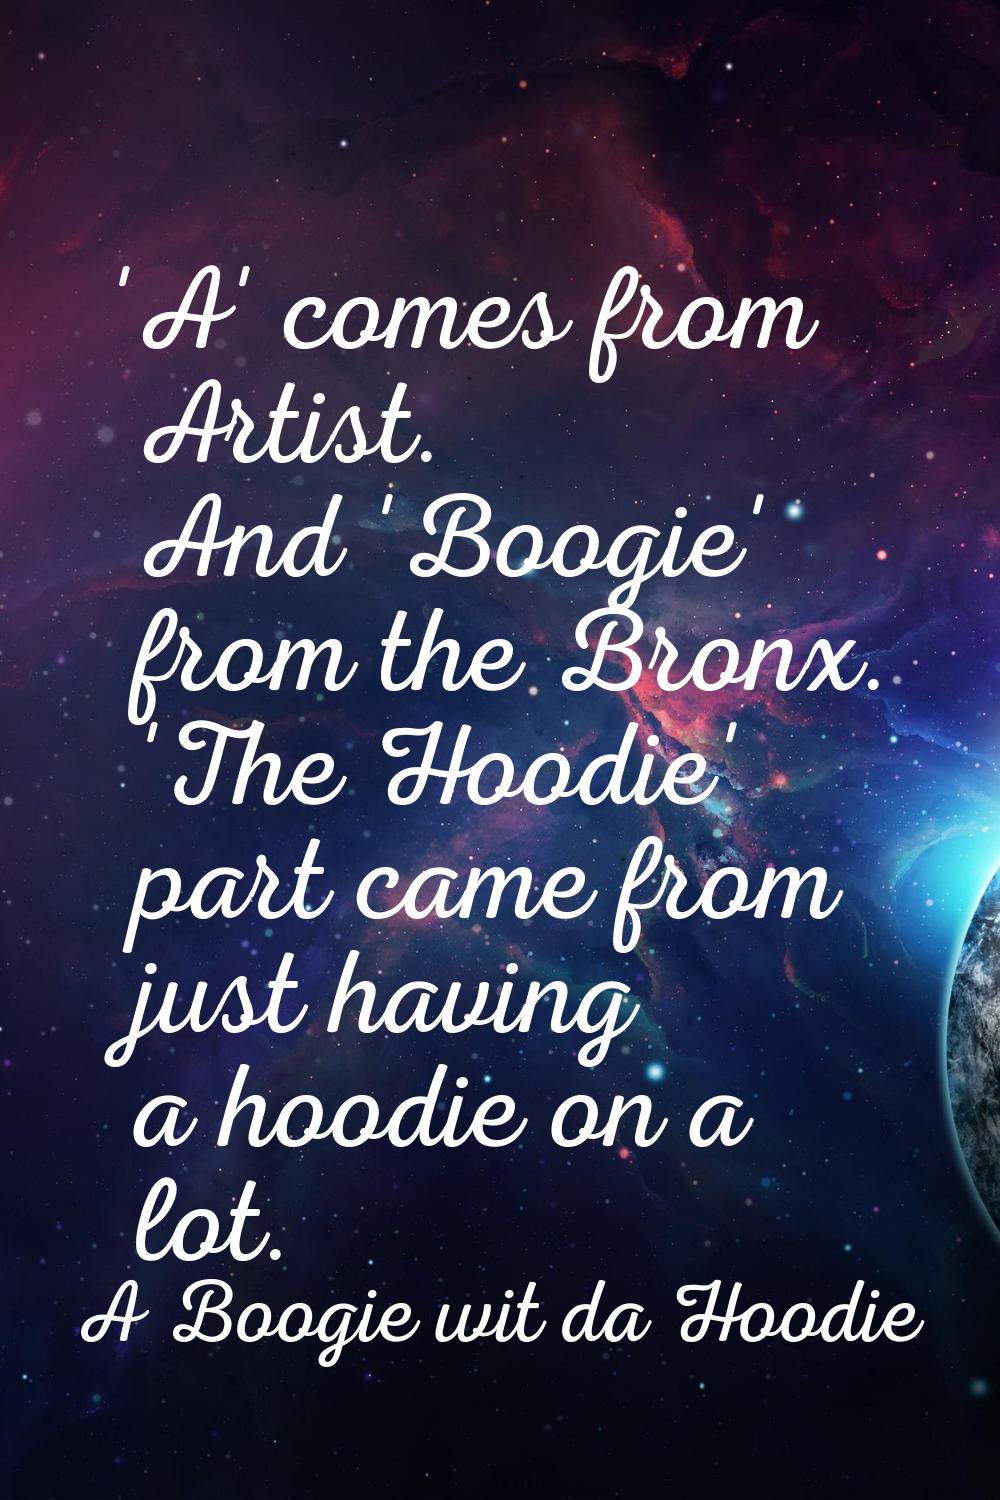 'A' comes from Artist. And 'Boogie' from the Bronx. 'The Hoodie' part came from just having a hoodi